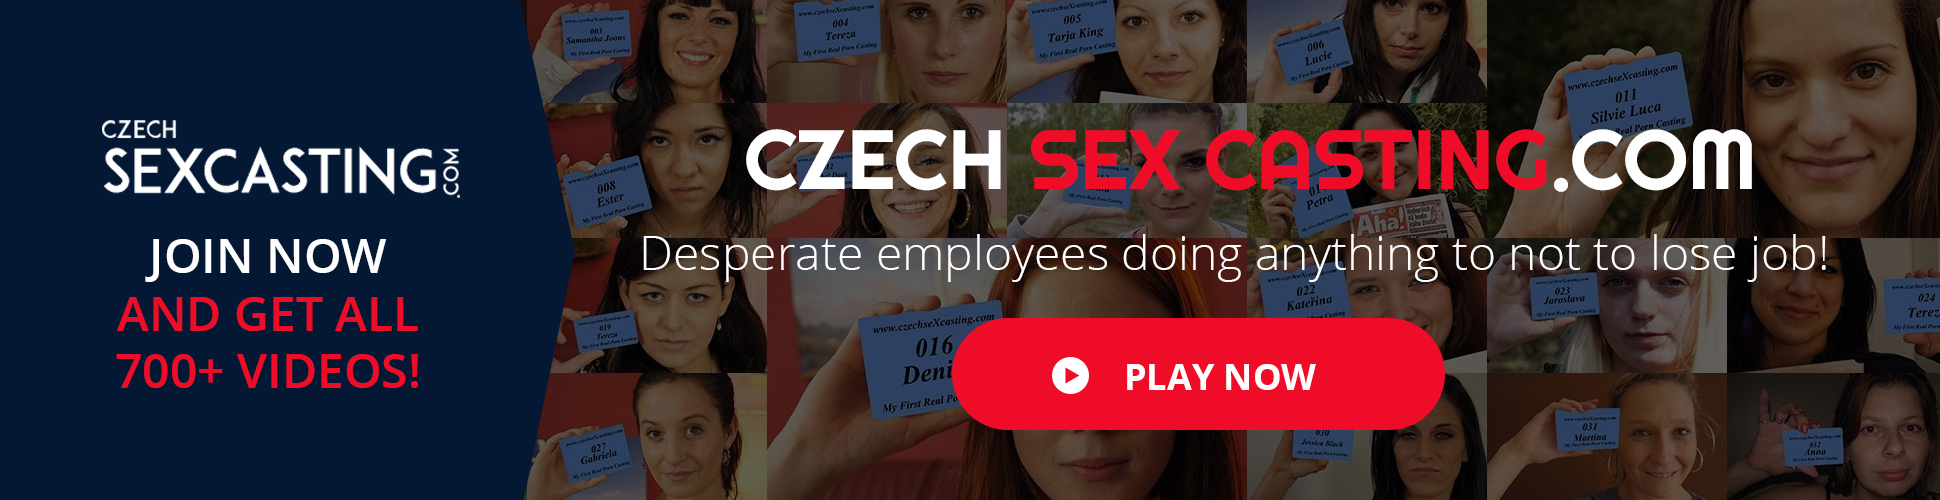 Czech Sex Casting - Paysites - Pornyteen image pic